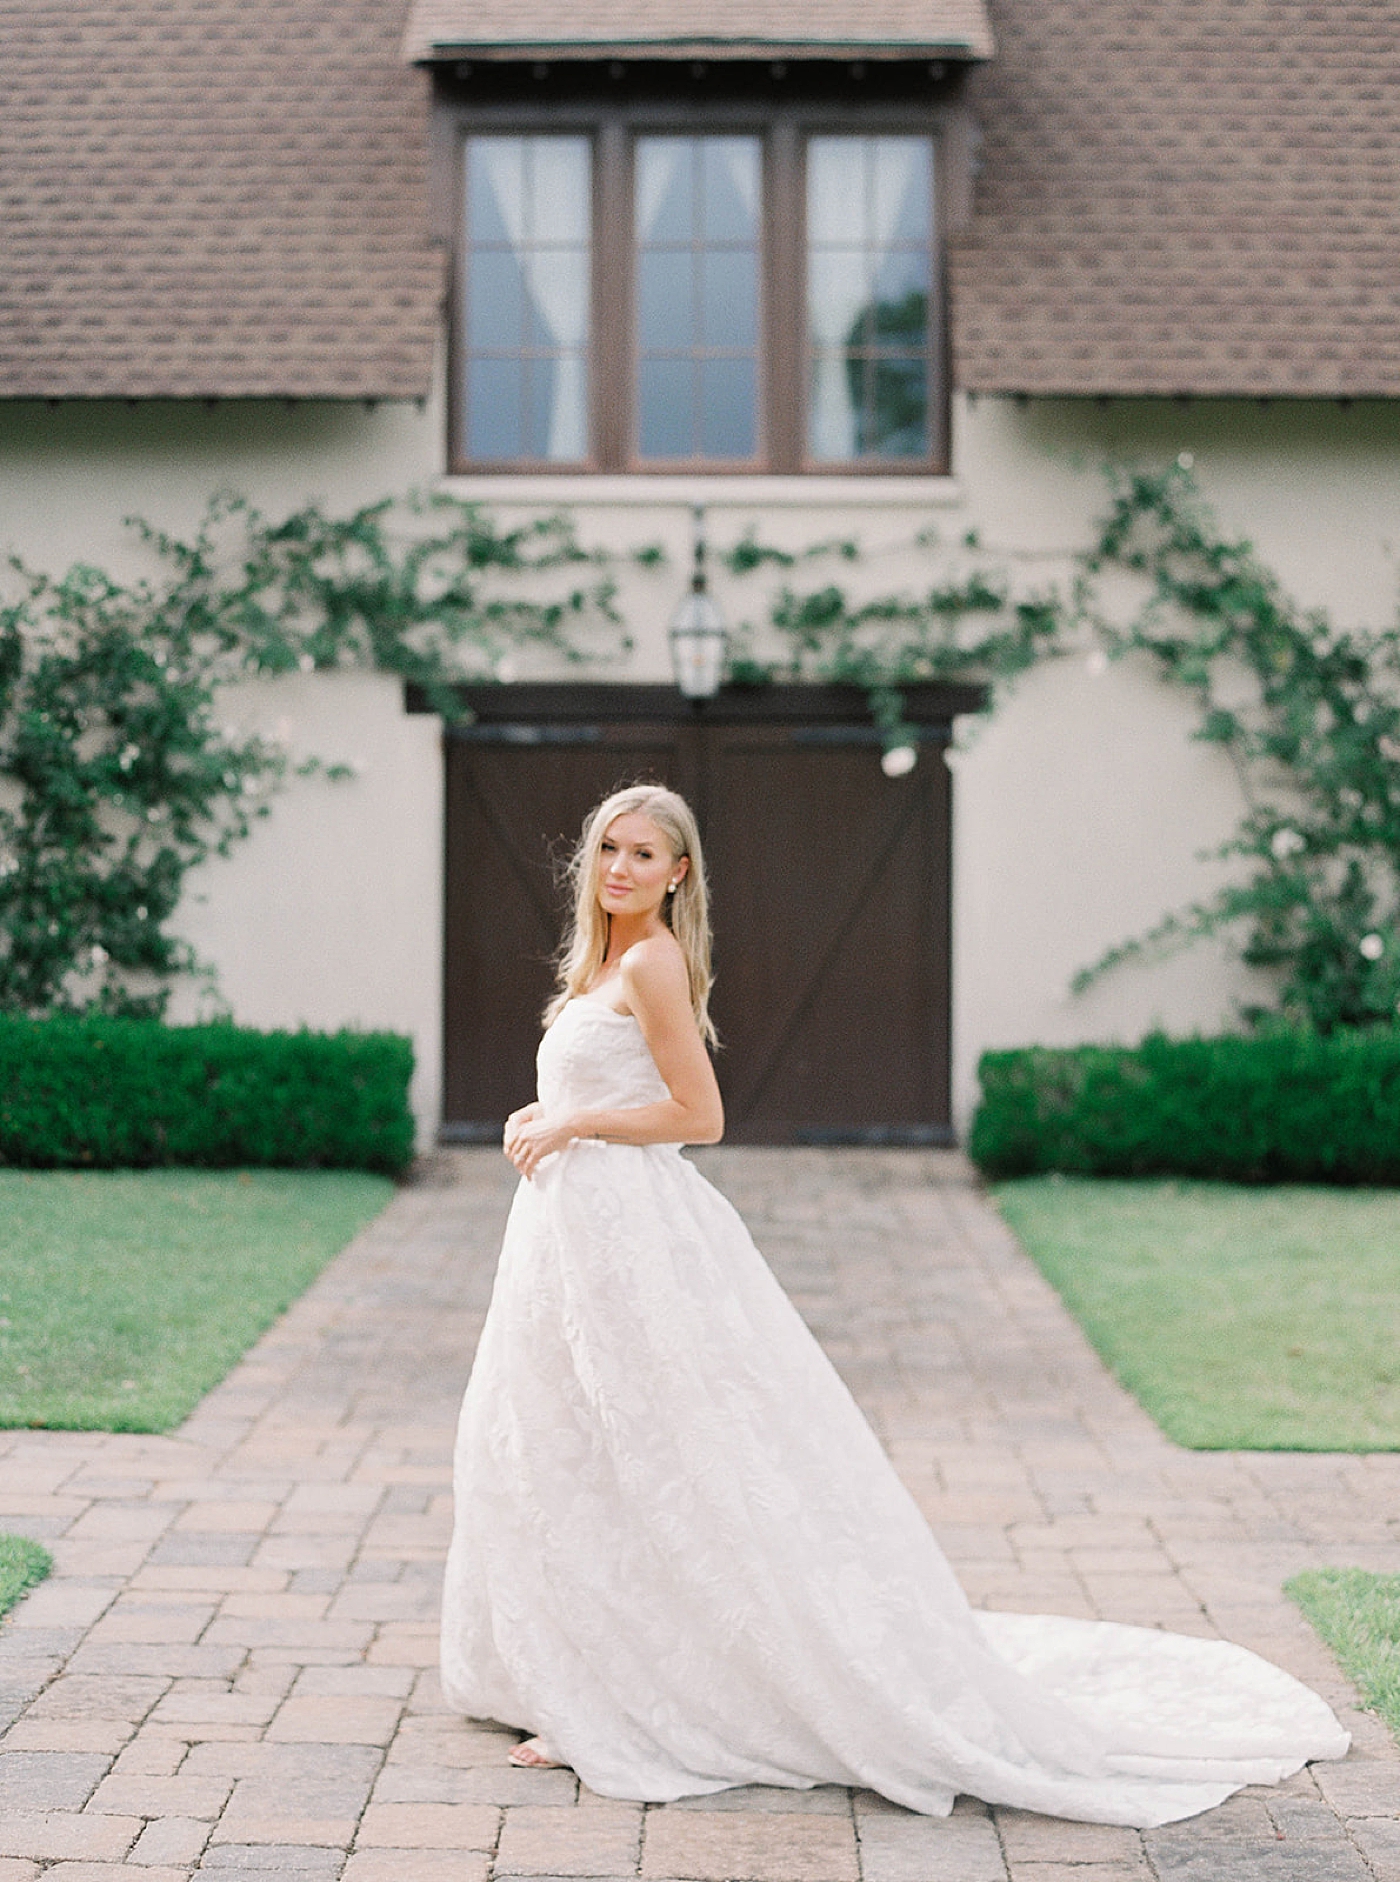 Bride posing in an embroidered dress | Charleston Photography Workshop with Carters Event Co